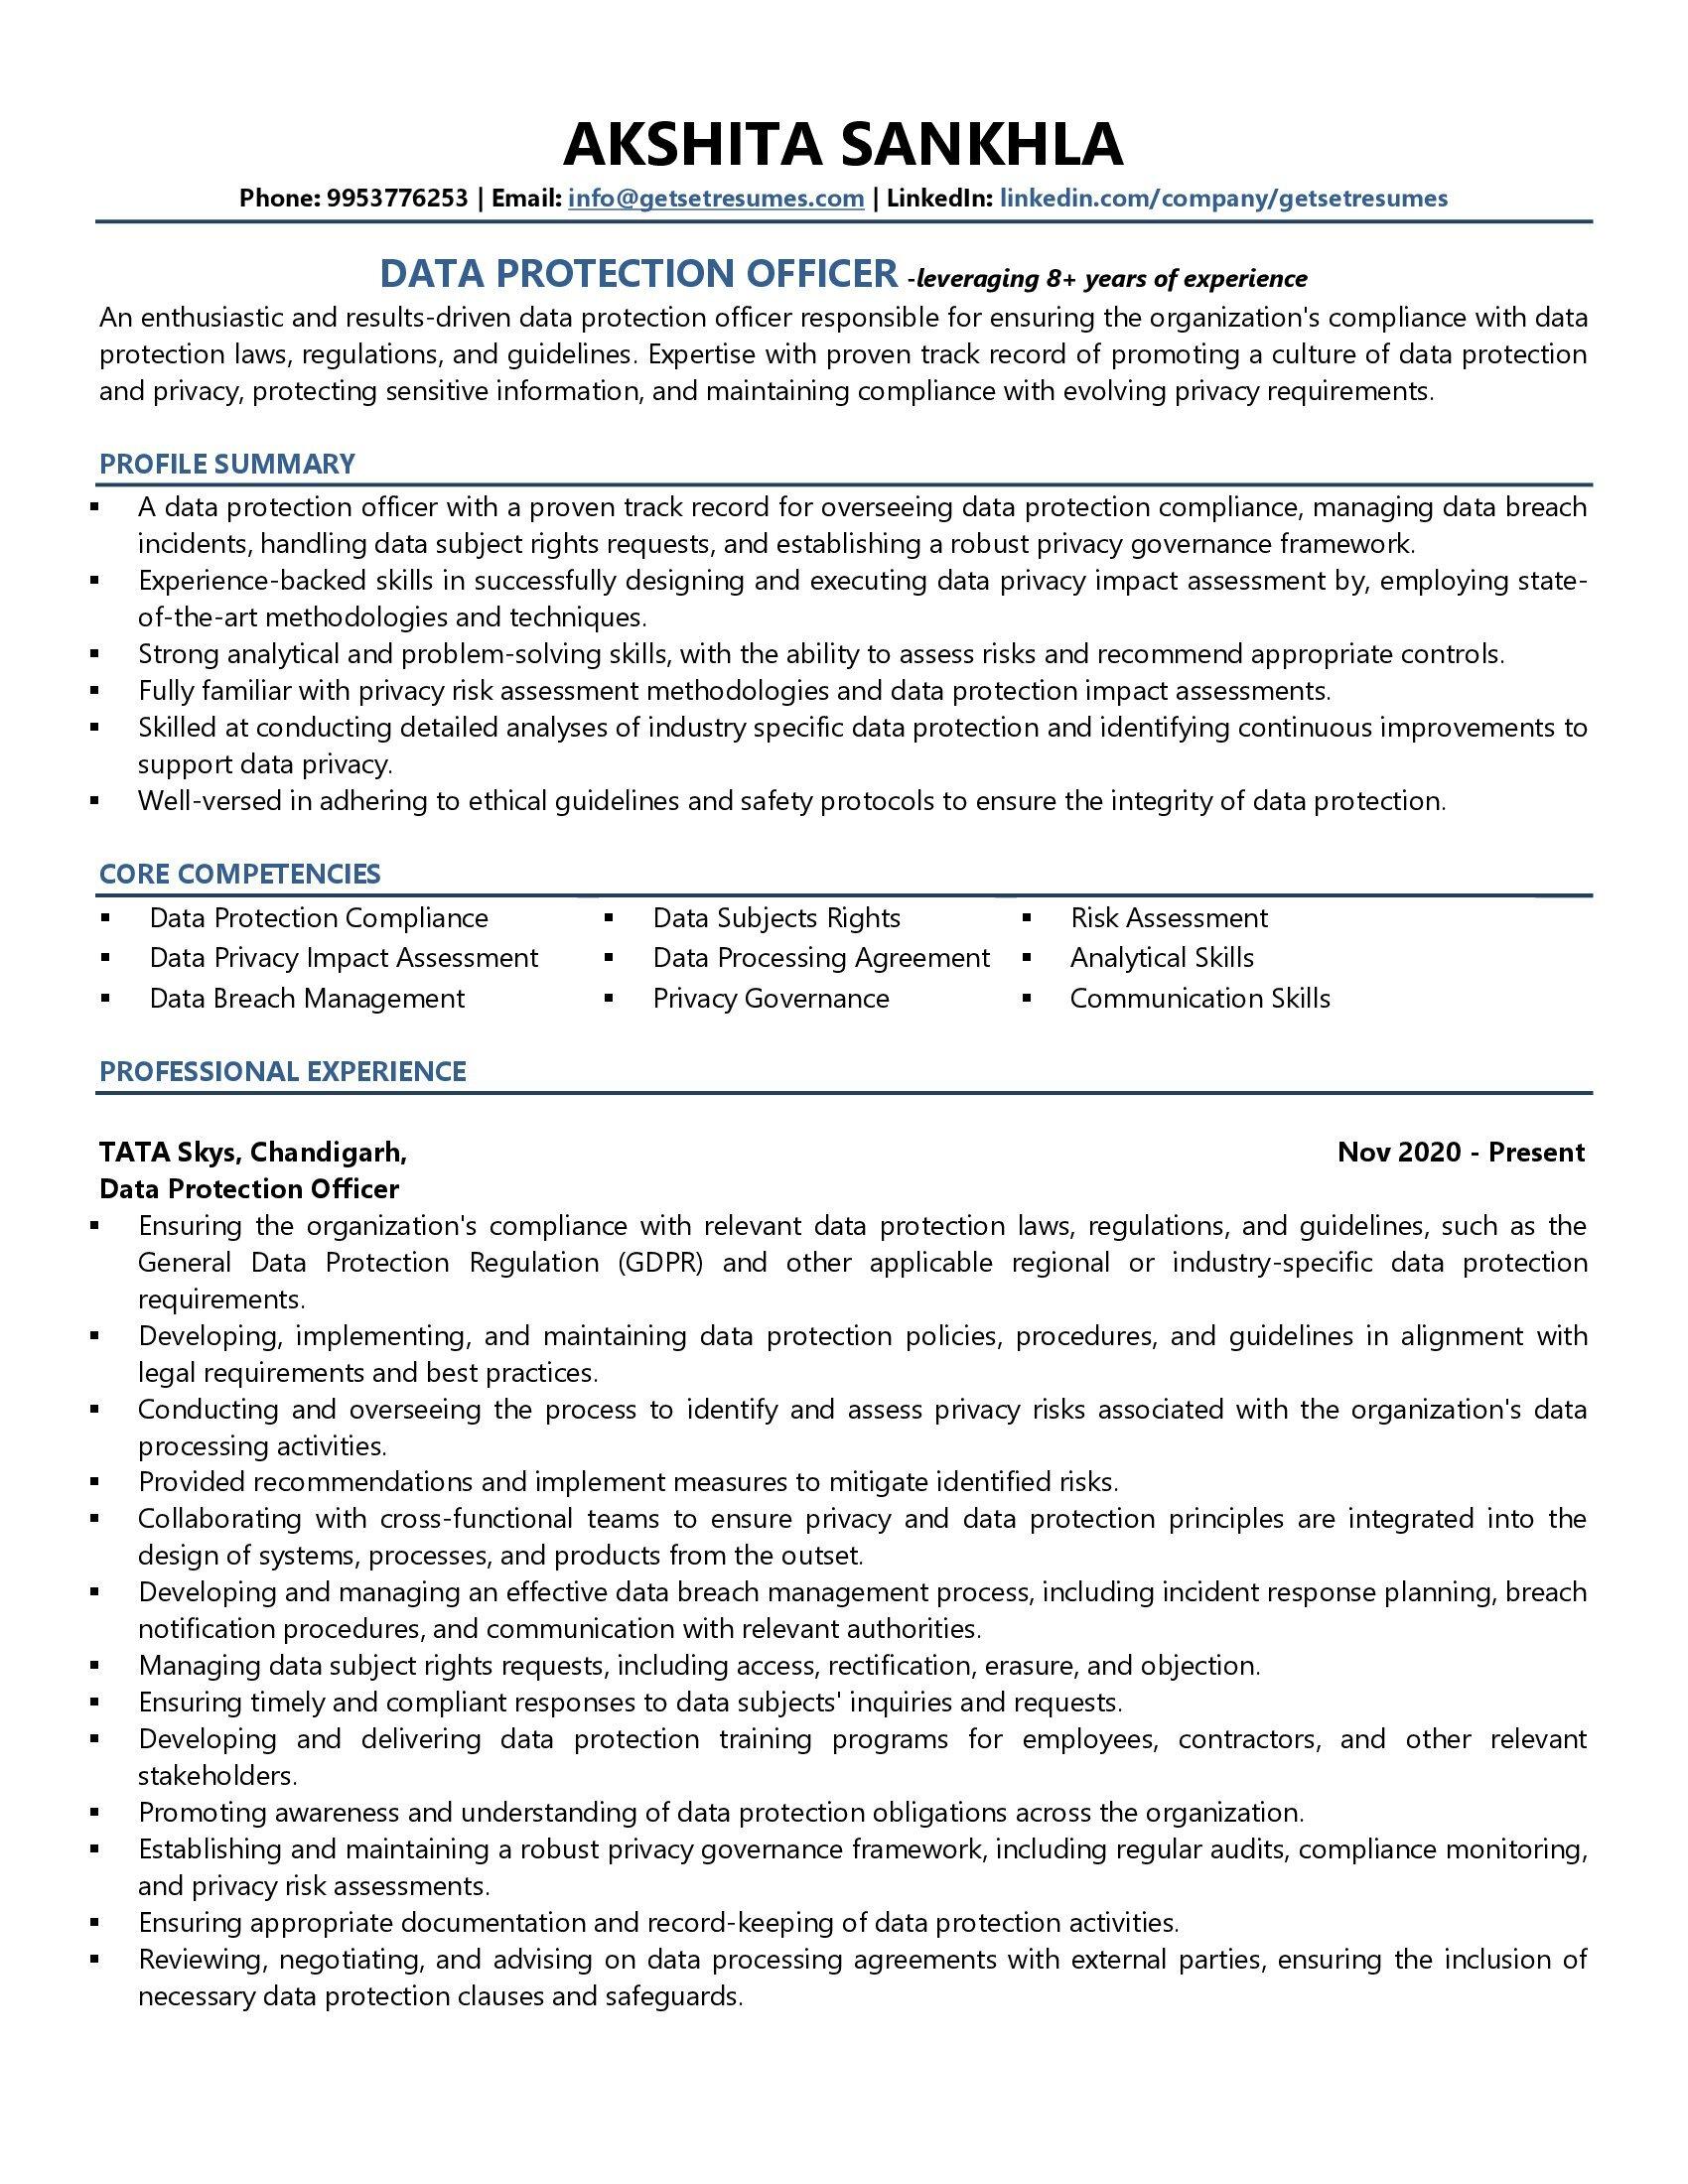 Data Protection Officer - Resume Example & Template